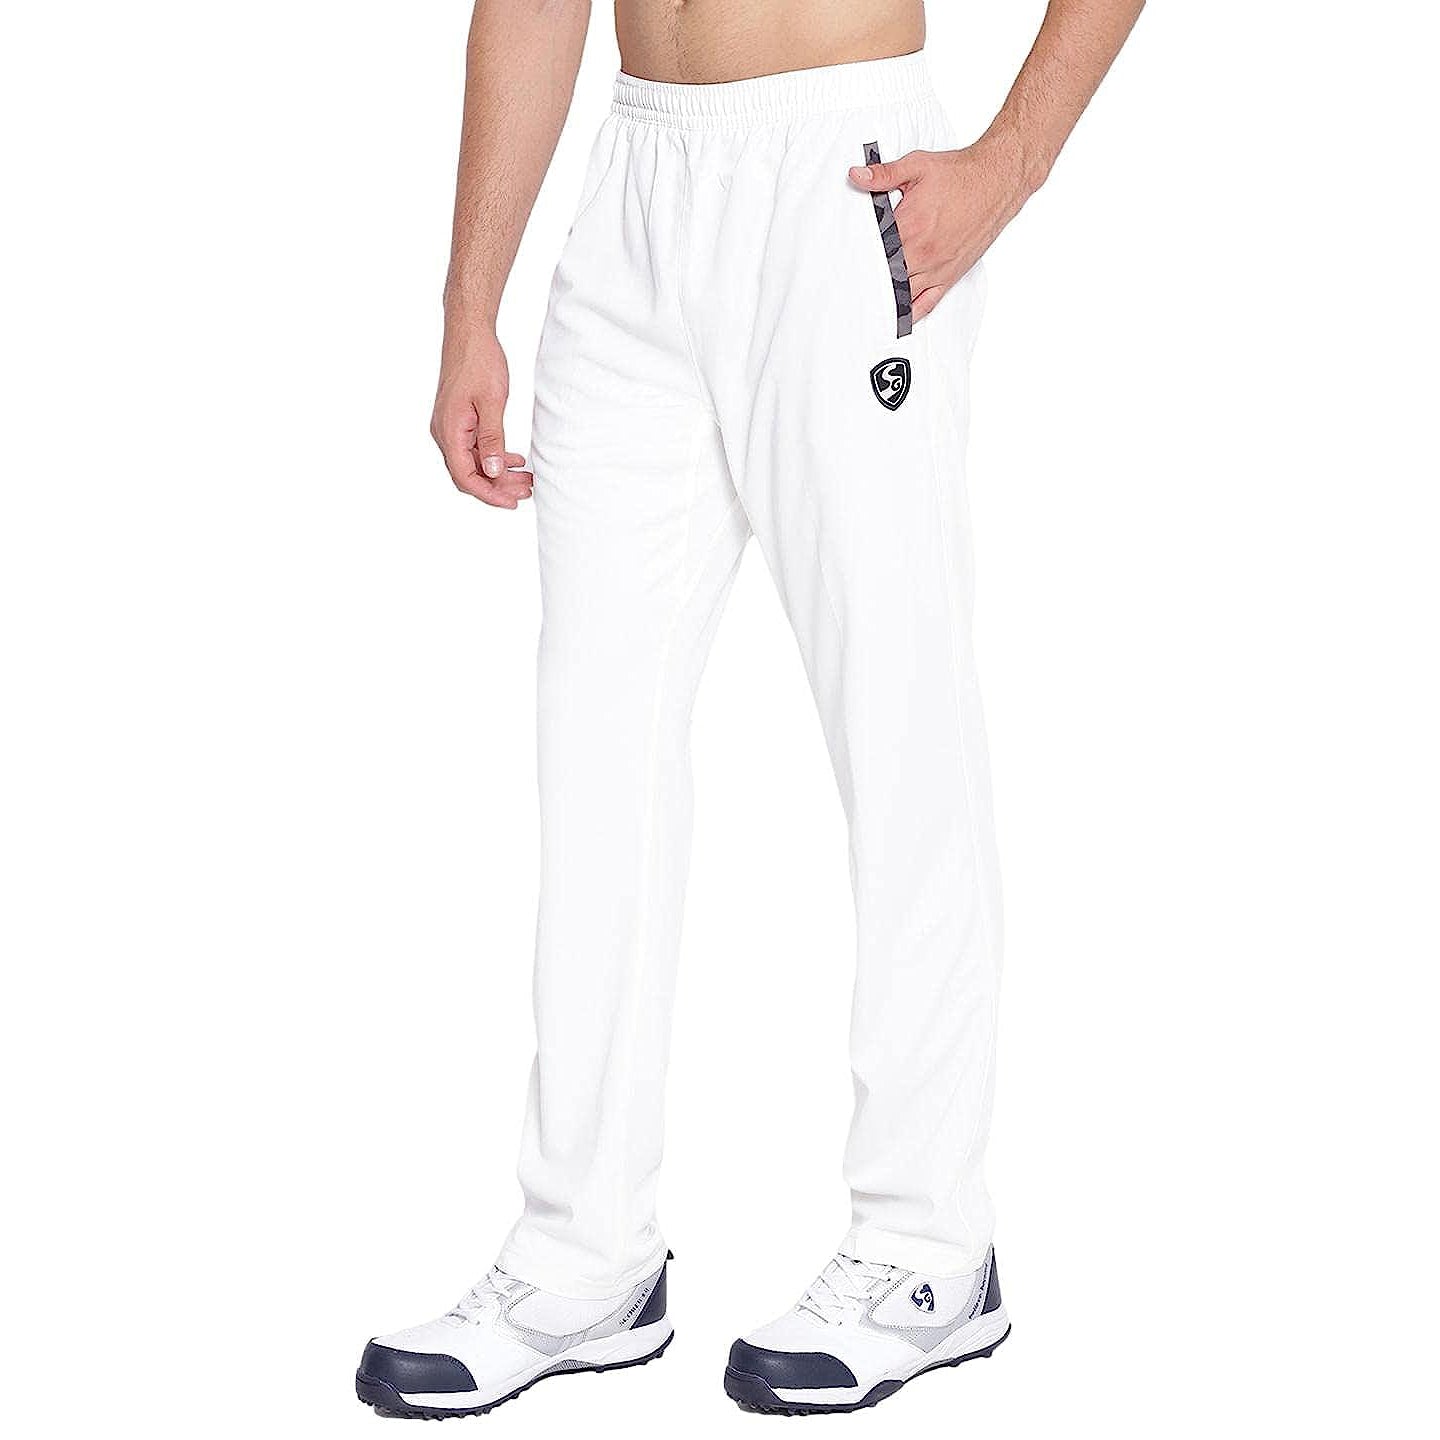 Buy Cricket Clothing at Best Price India  GM Cricket